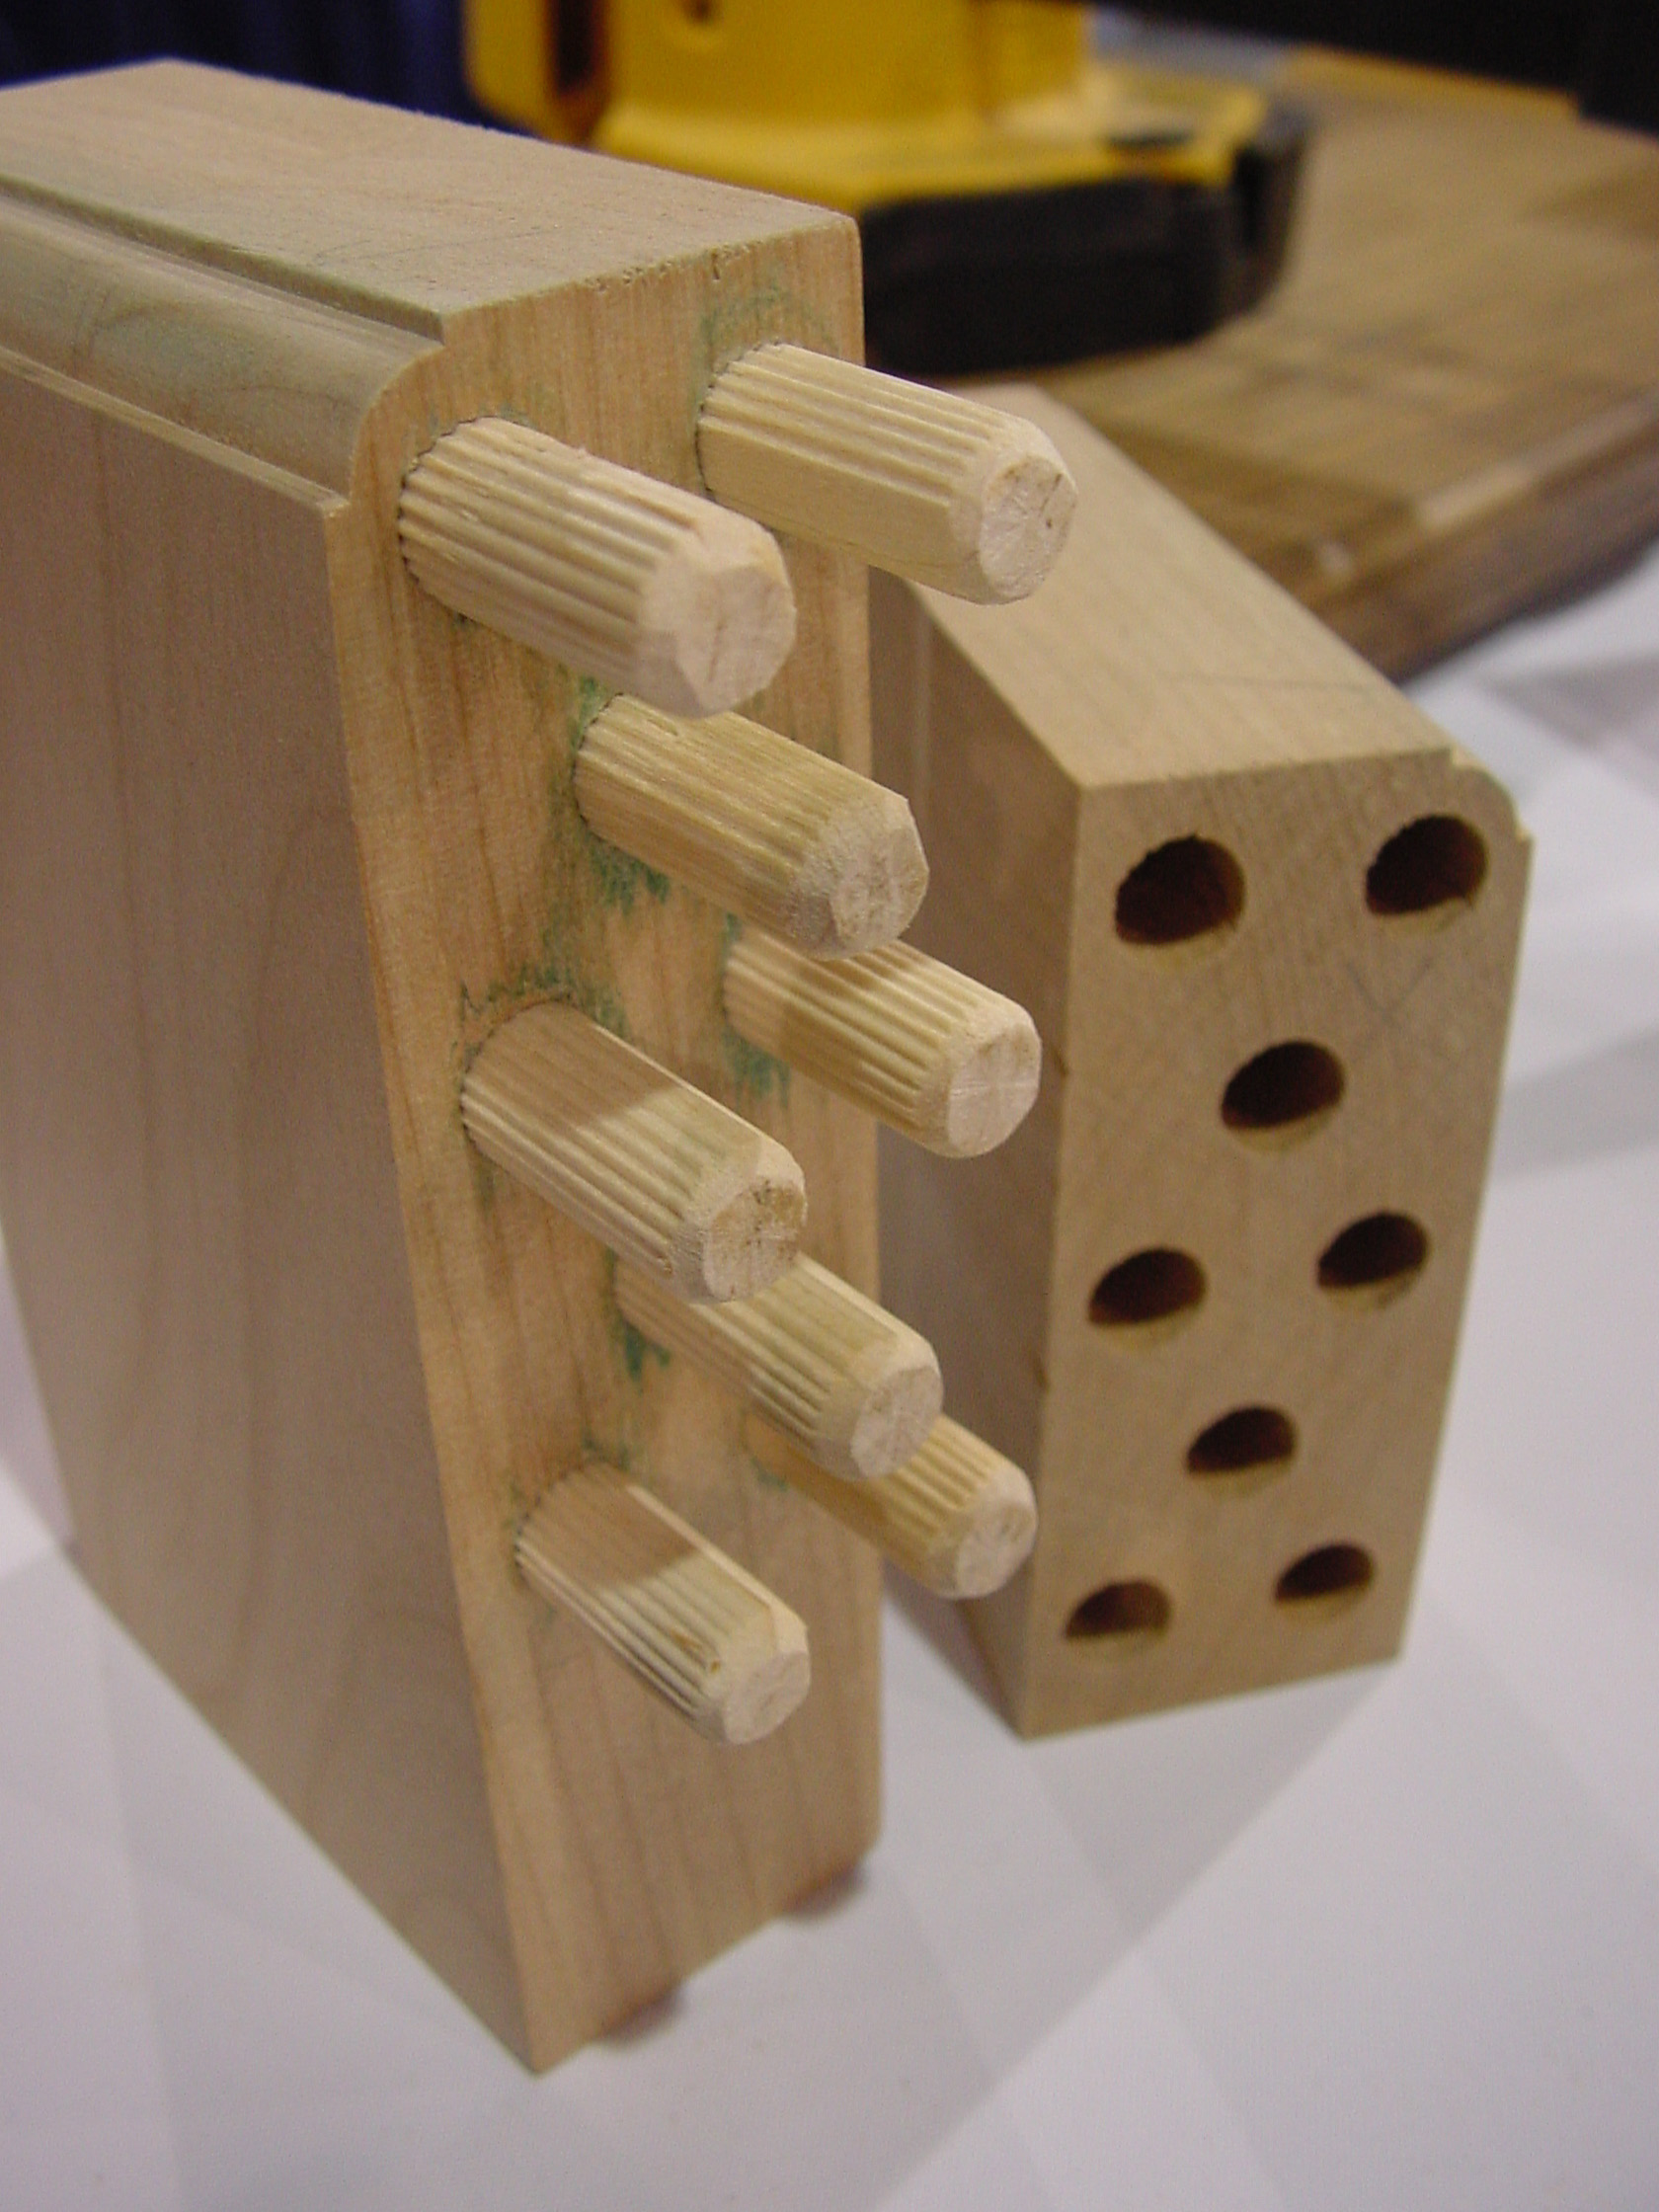 woodworking: dowel joints simple, effective & invisible